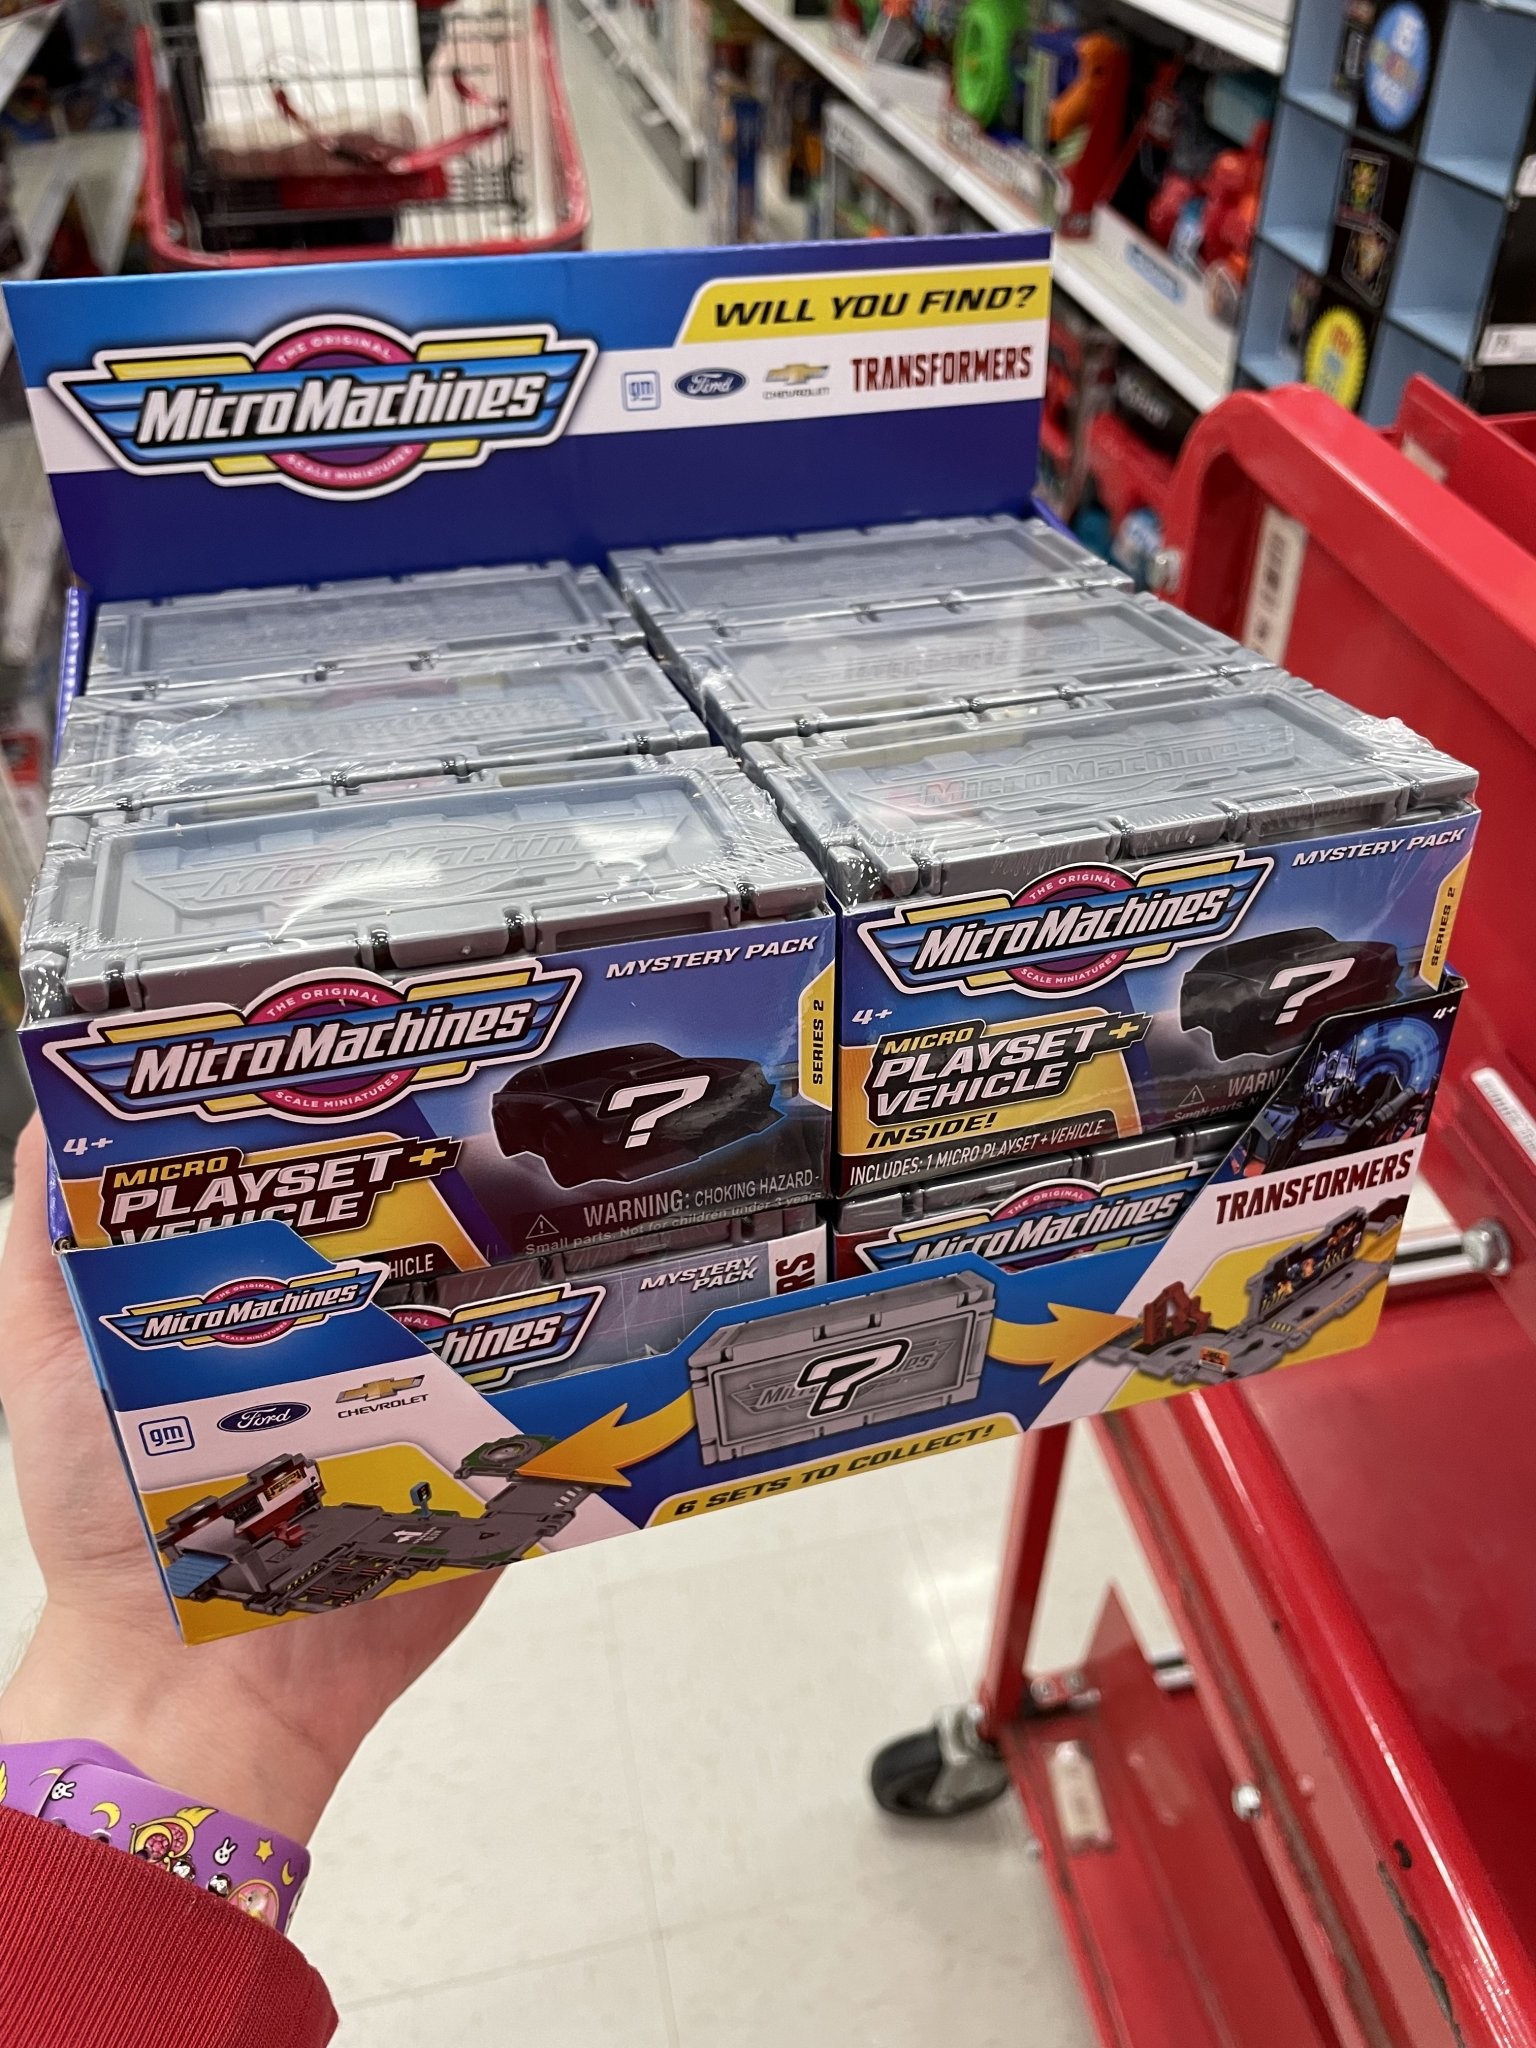 Transformers Micro Machines Blind Box Series 2 Found at Target